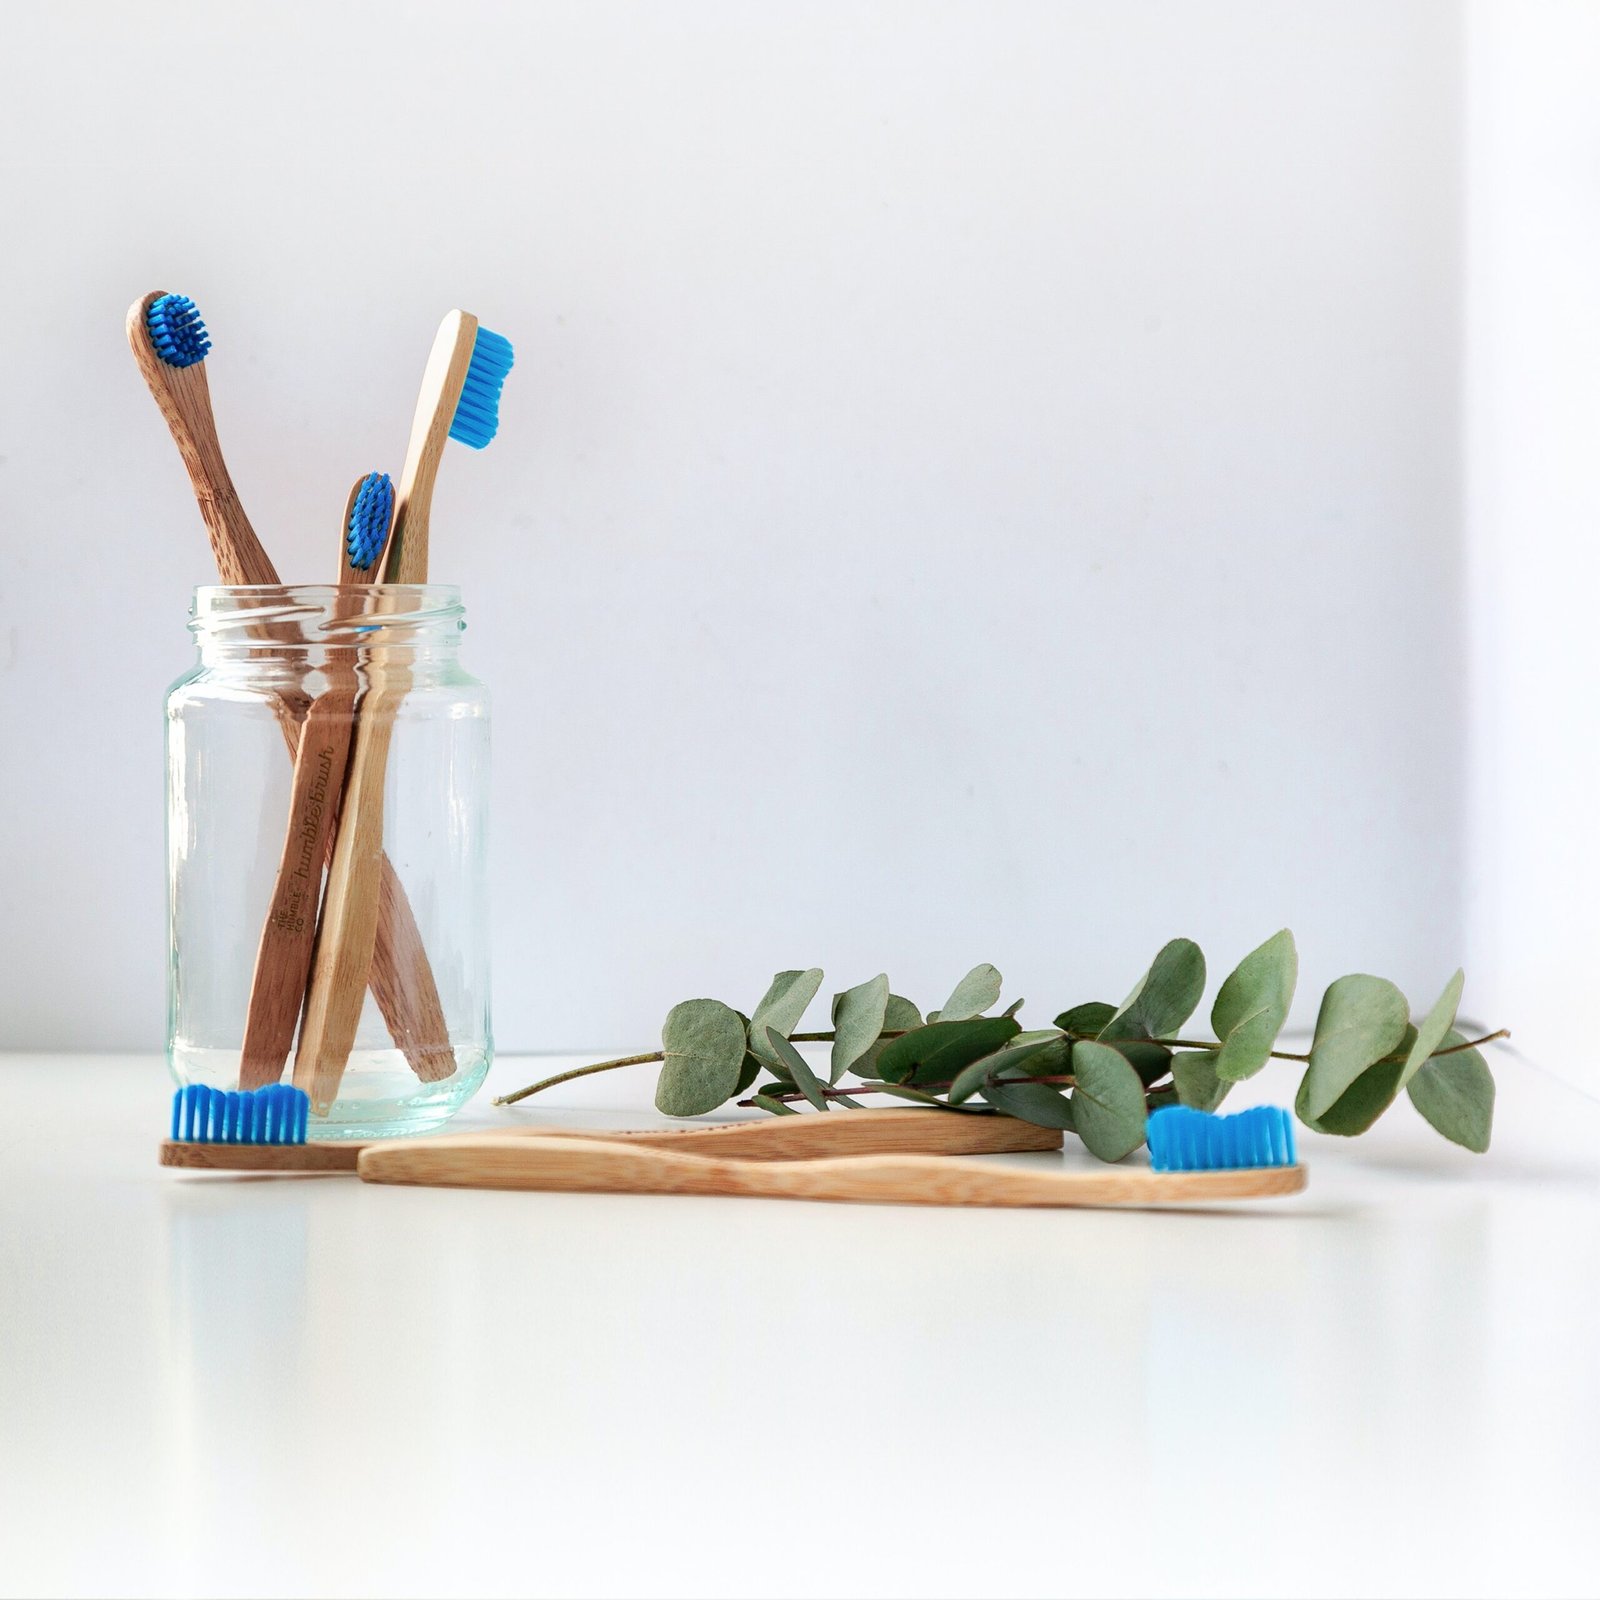 blue-and-white-toothbrush-in-clear-glass-jar-scaled Home